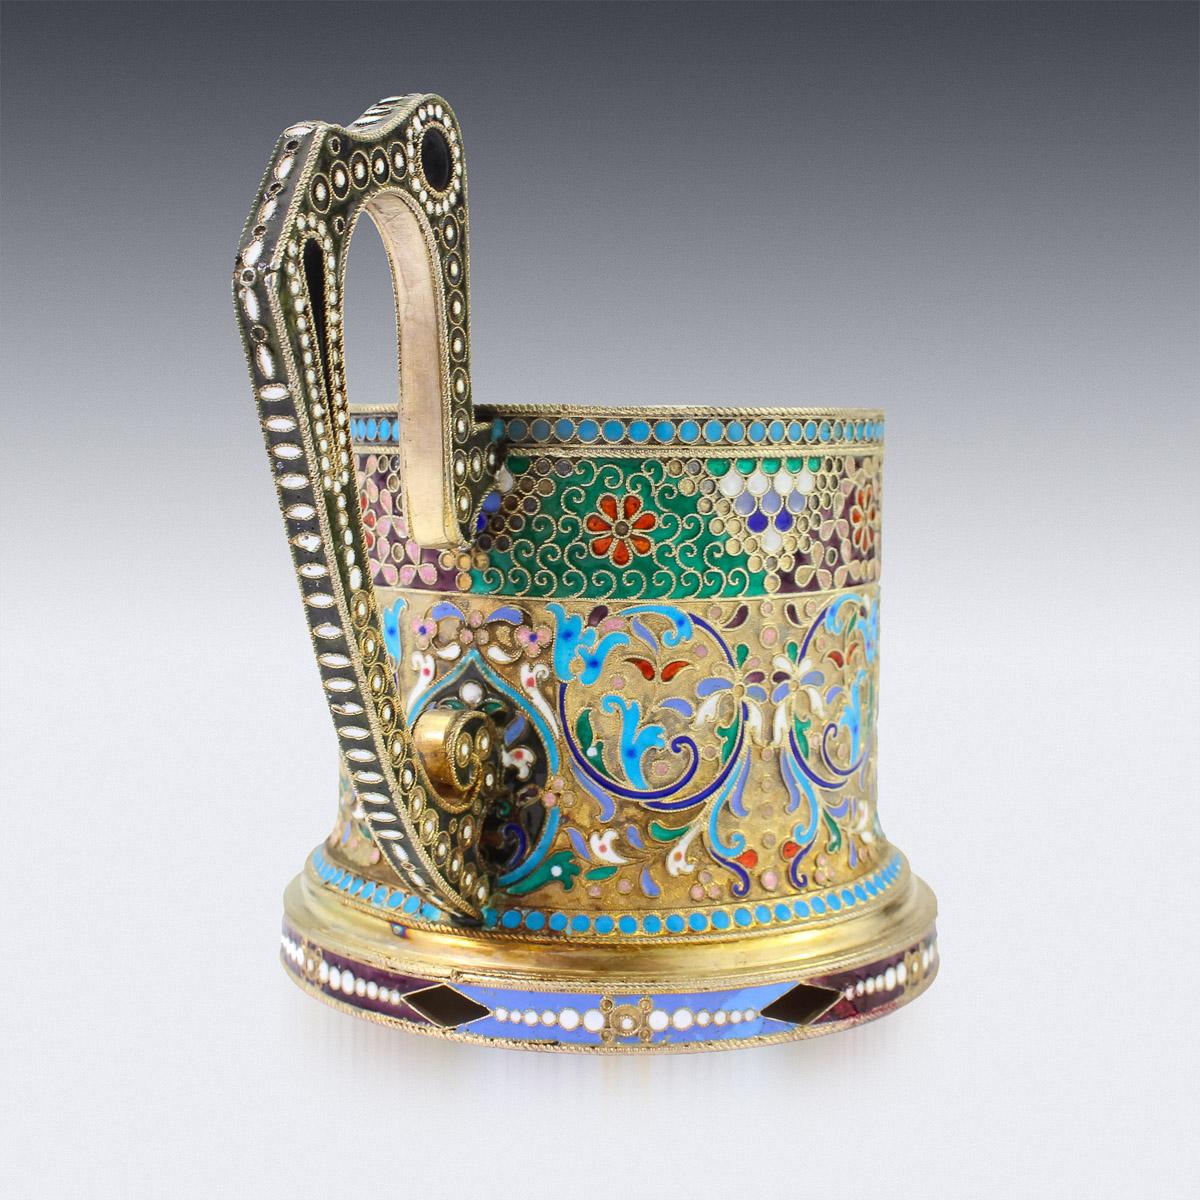 20th Century Imperial Russian Solid Silver-Gilt Enamel Tea Glass Holder, c.1900 1